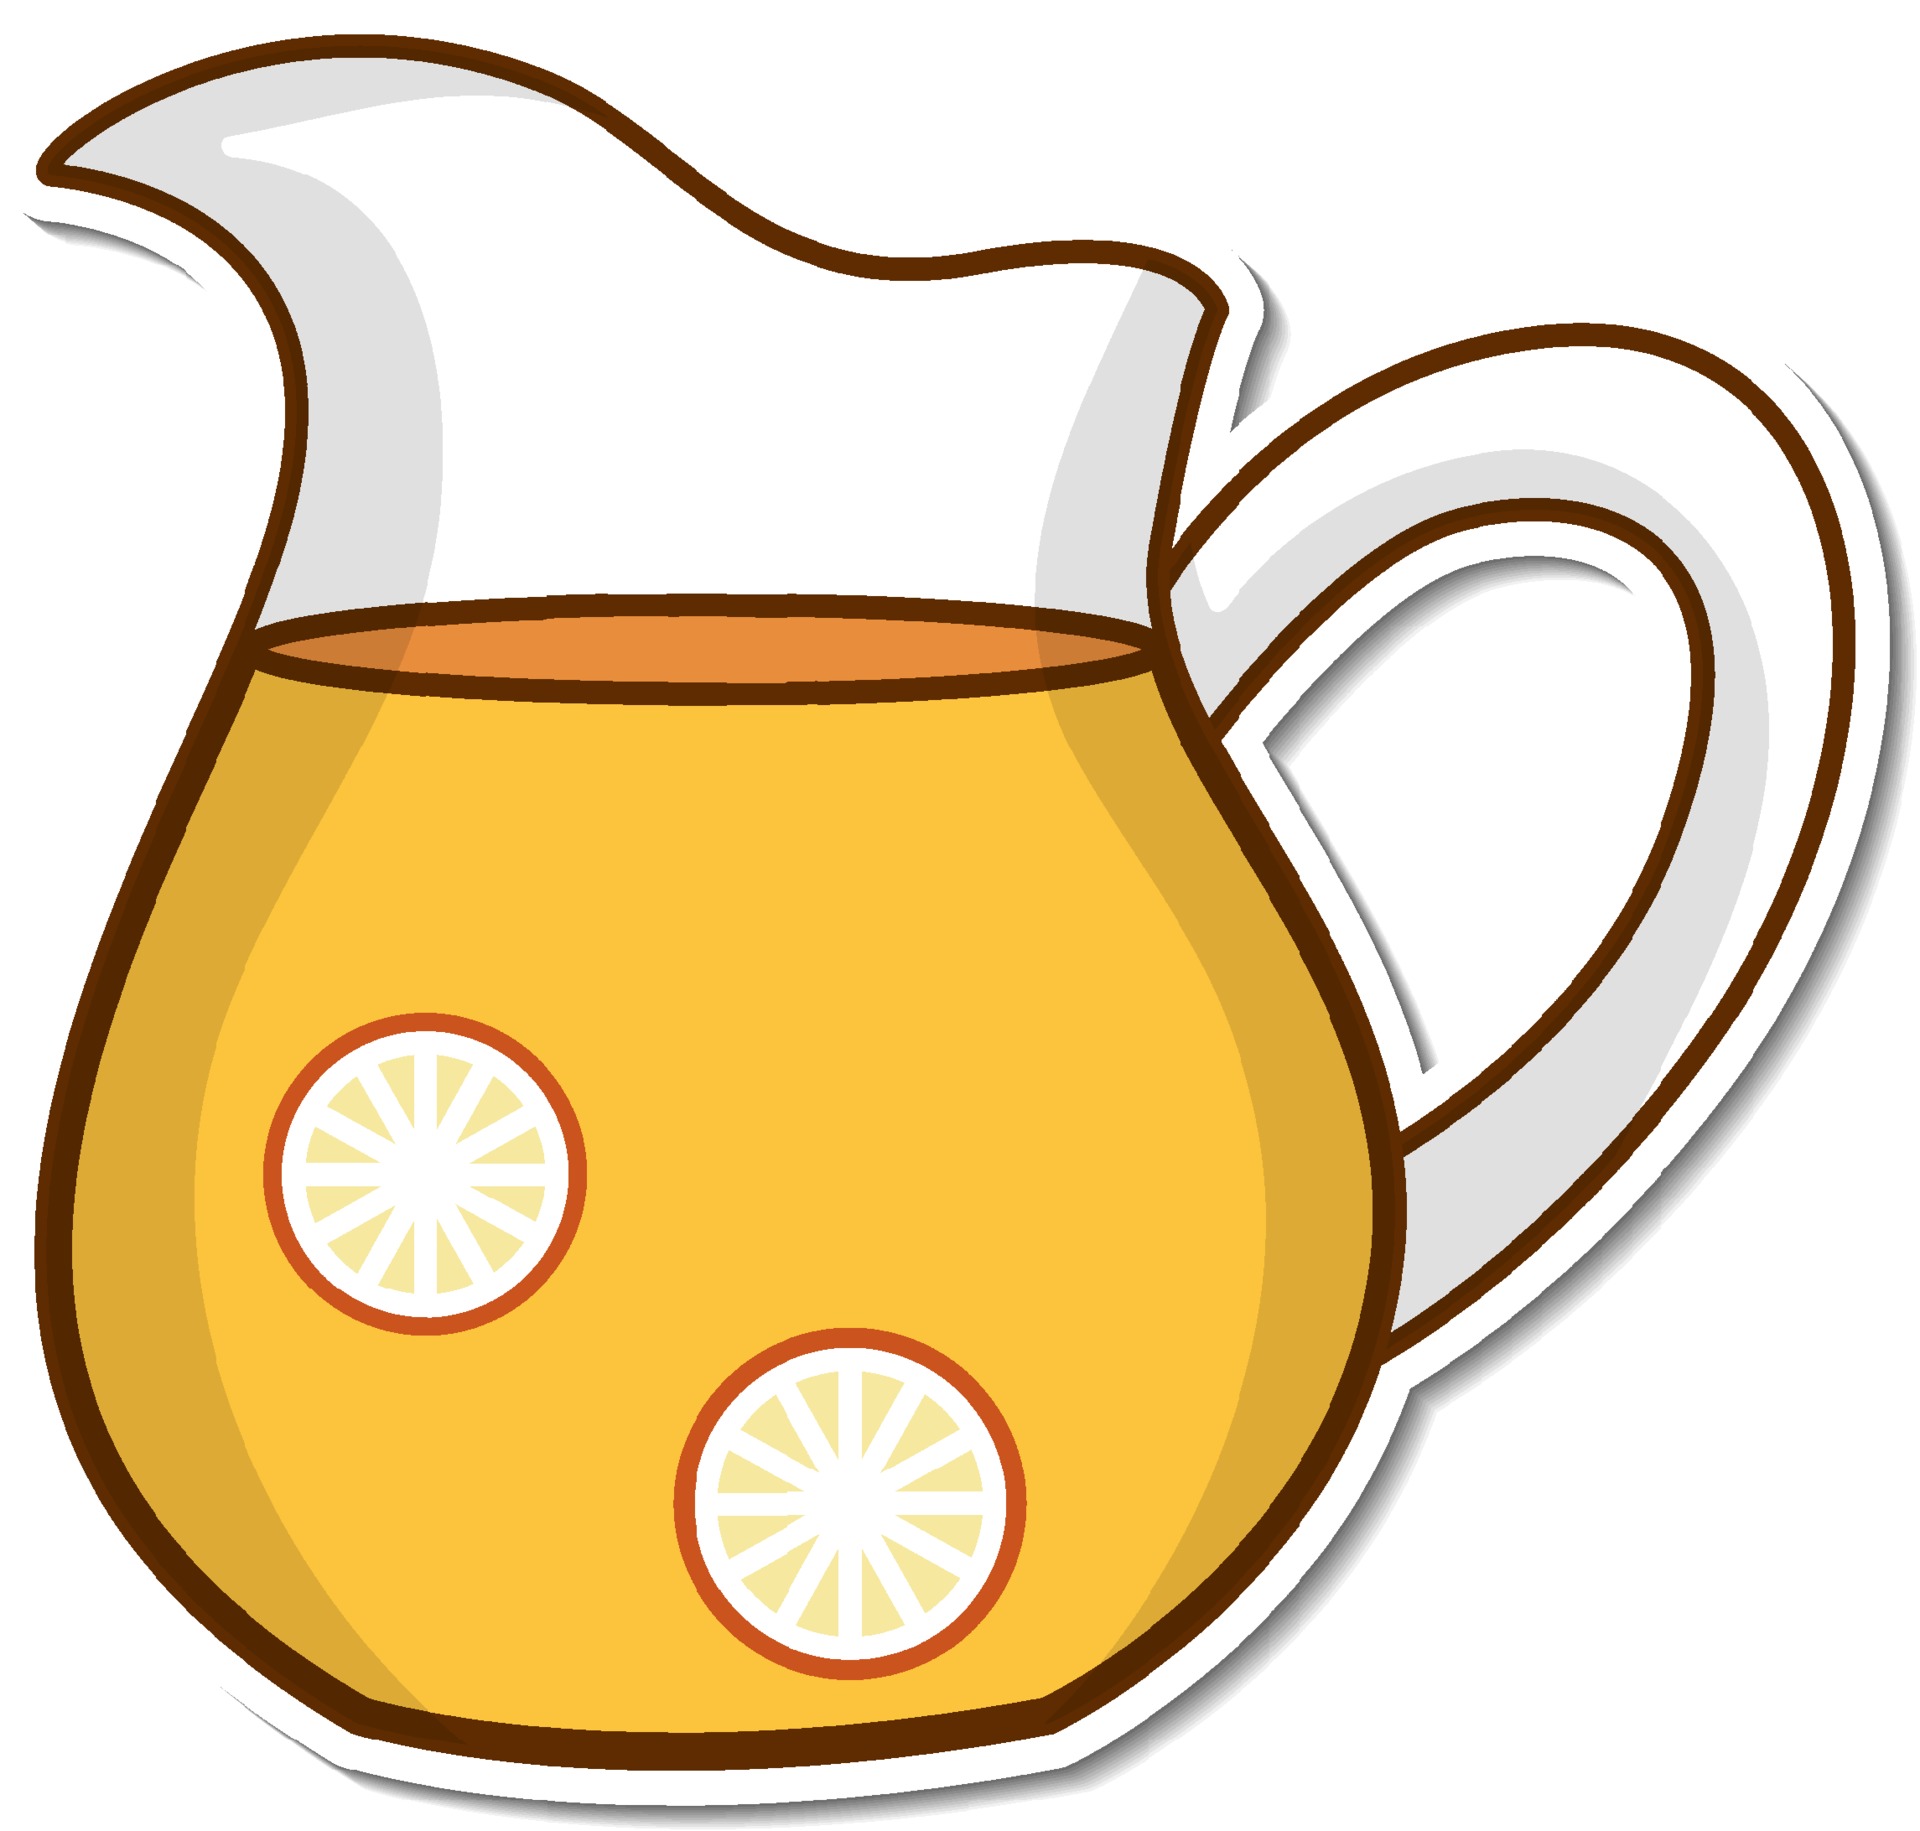 https://static.vecteezy.com/system/resources/previews/003/096/556/original/sticker-pitcher-of-orange-juice-on-white-background-free-vector.jpg